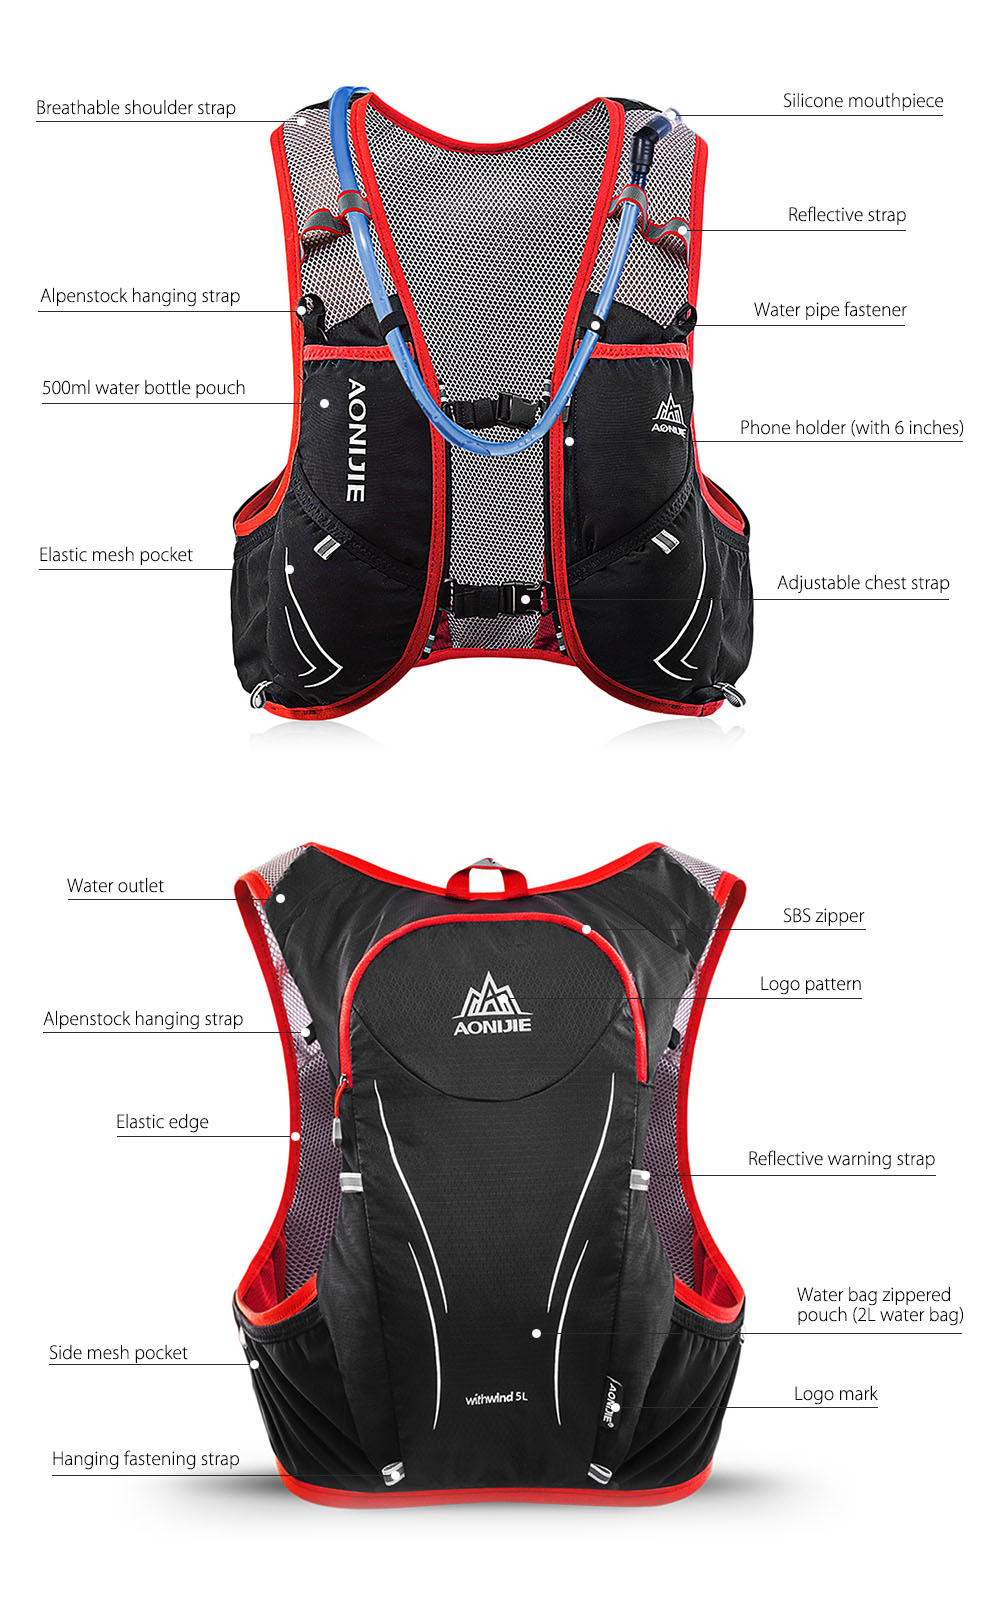 AONIJIE E906S 5L Upgraded Outdoor Running Marathon Reflective Backpack Hydration Vest Pack